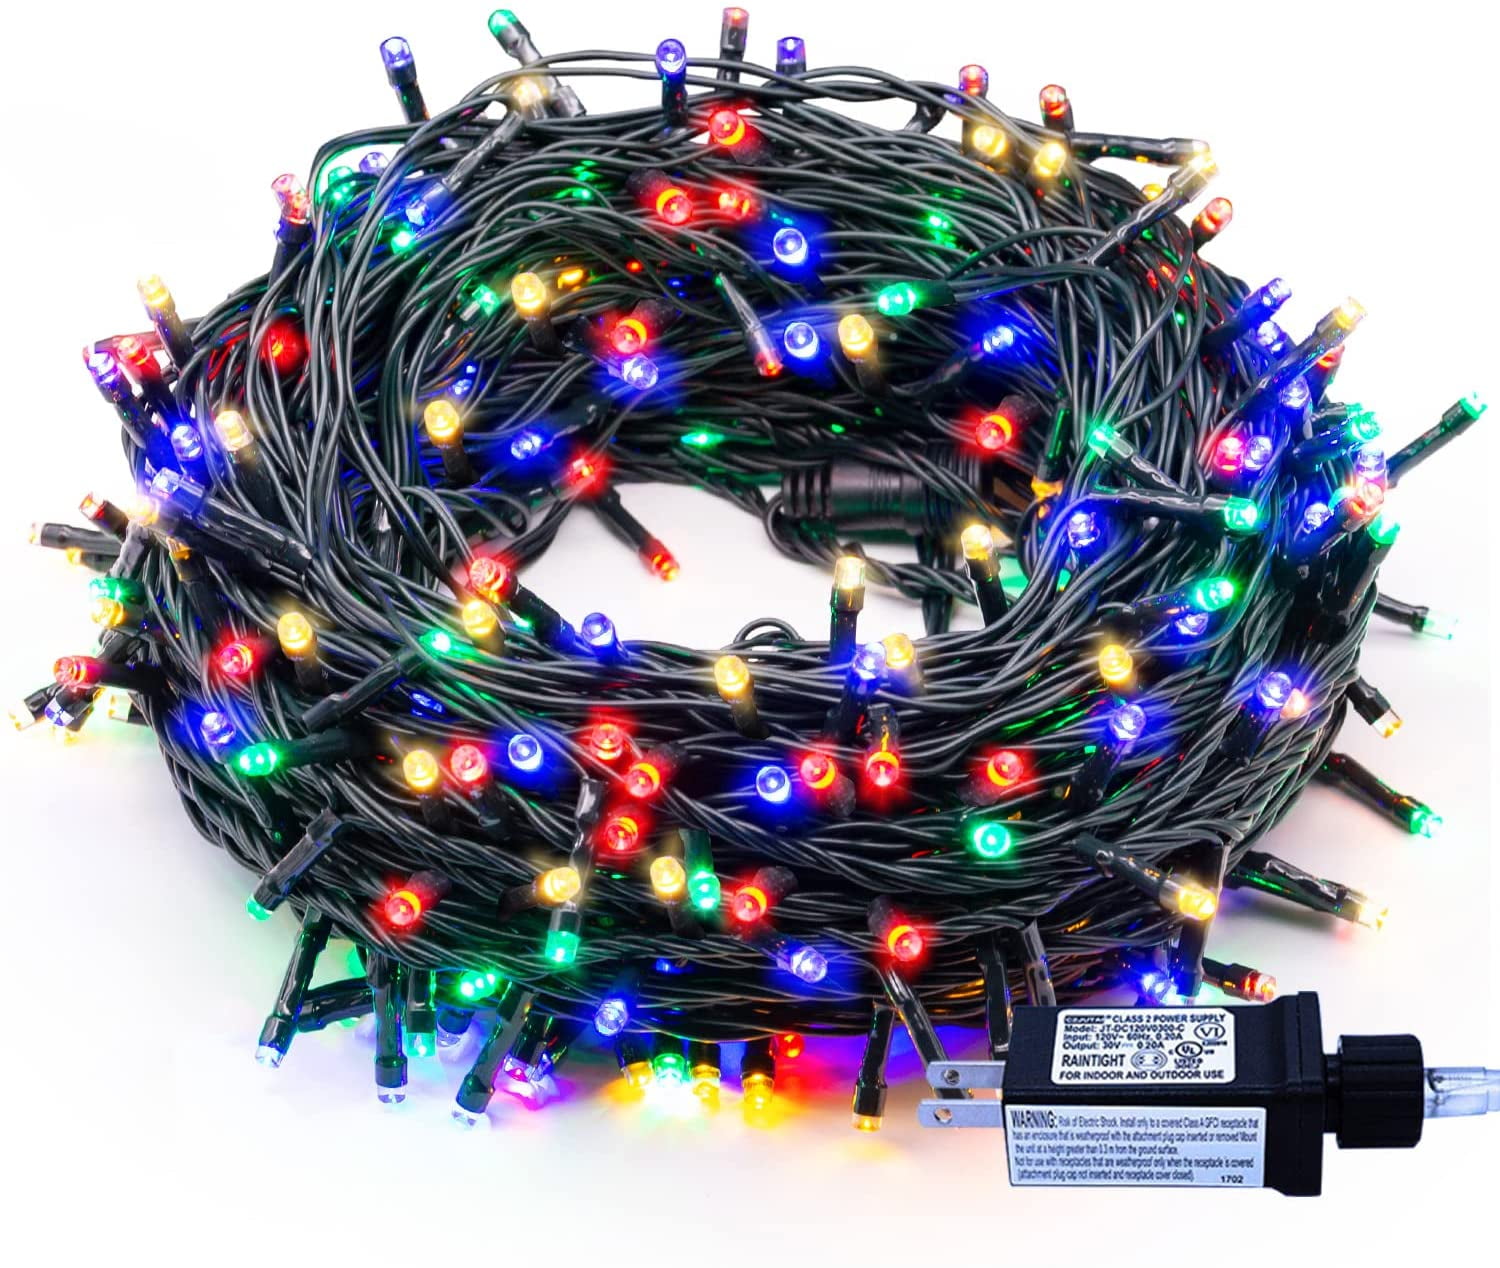 Pro Connect 35m 350 Blue Connectable String Lights Black Cable –